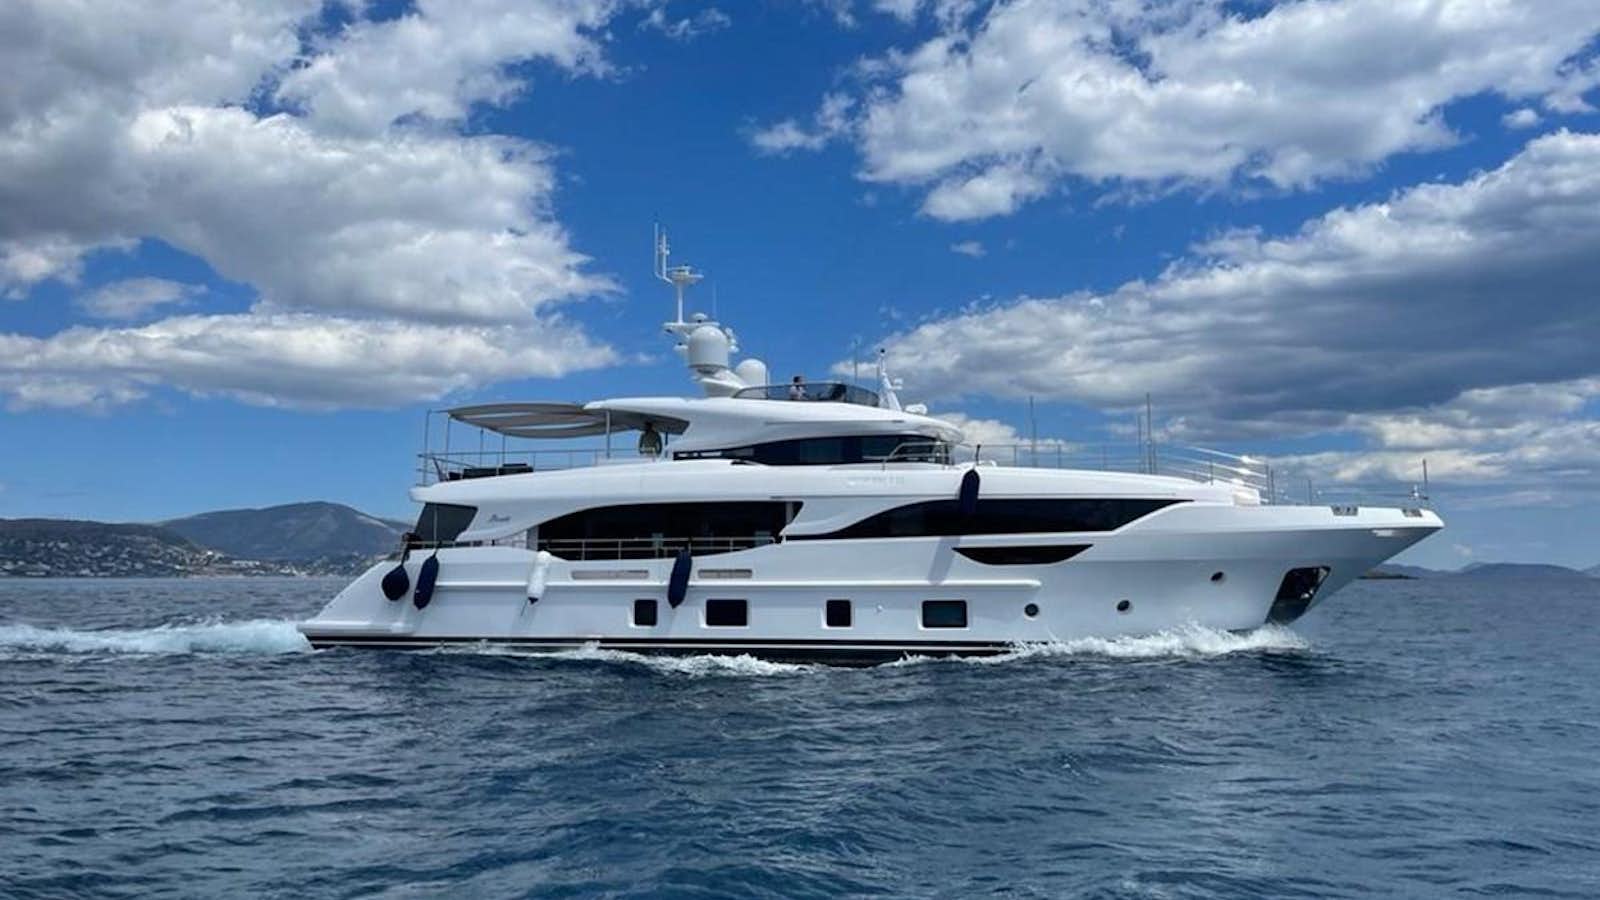 Watch Video for QUEEN J II Yacht for Sale